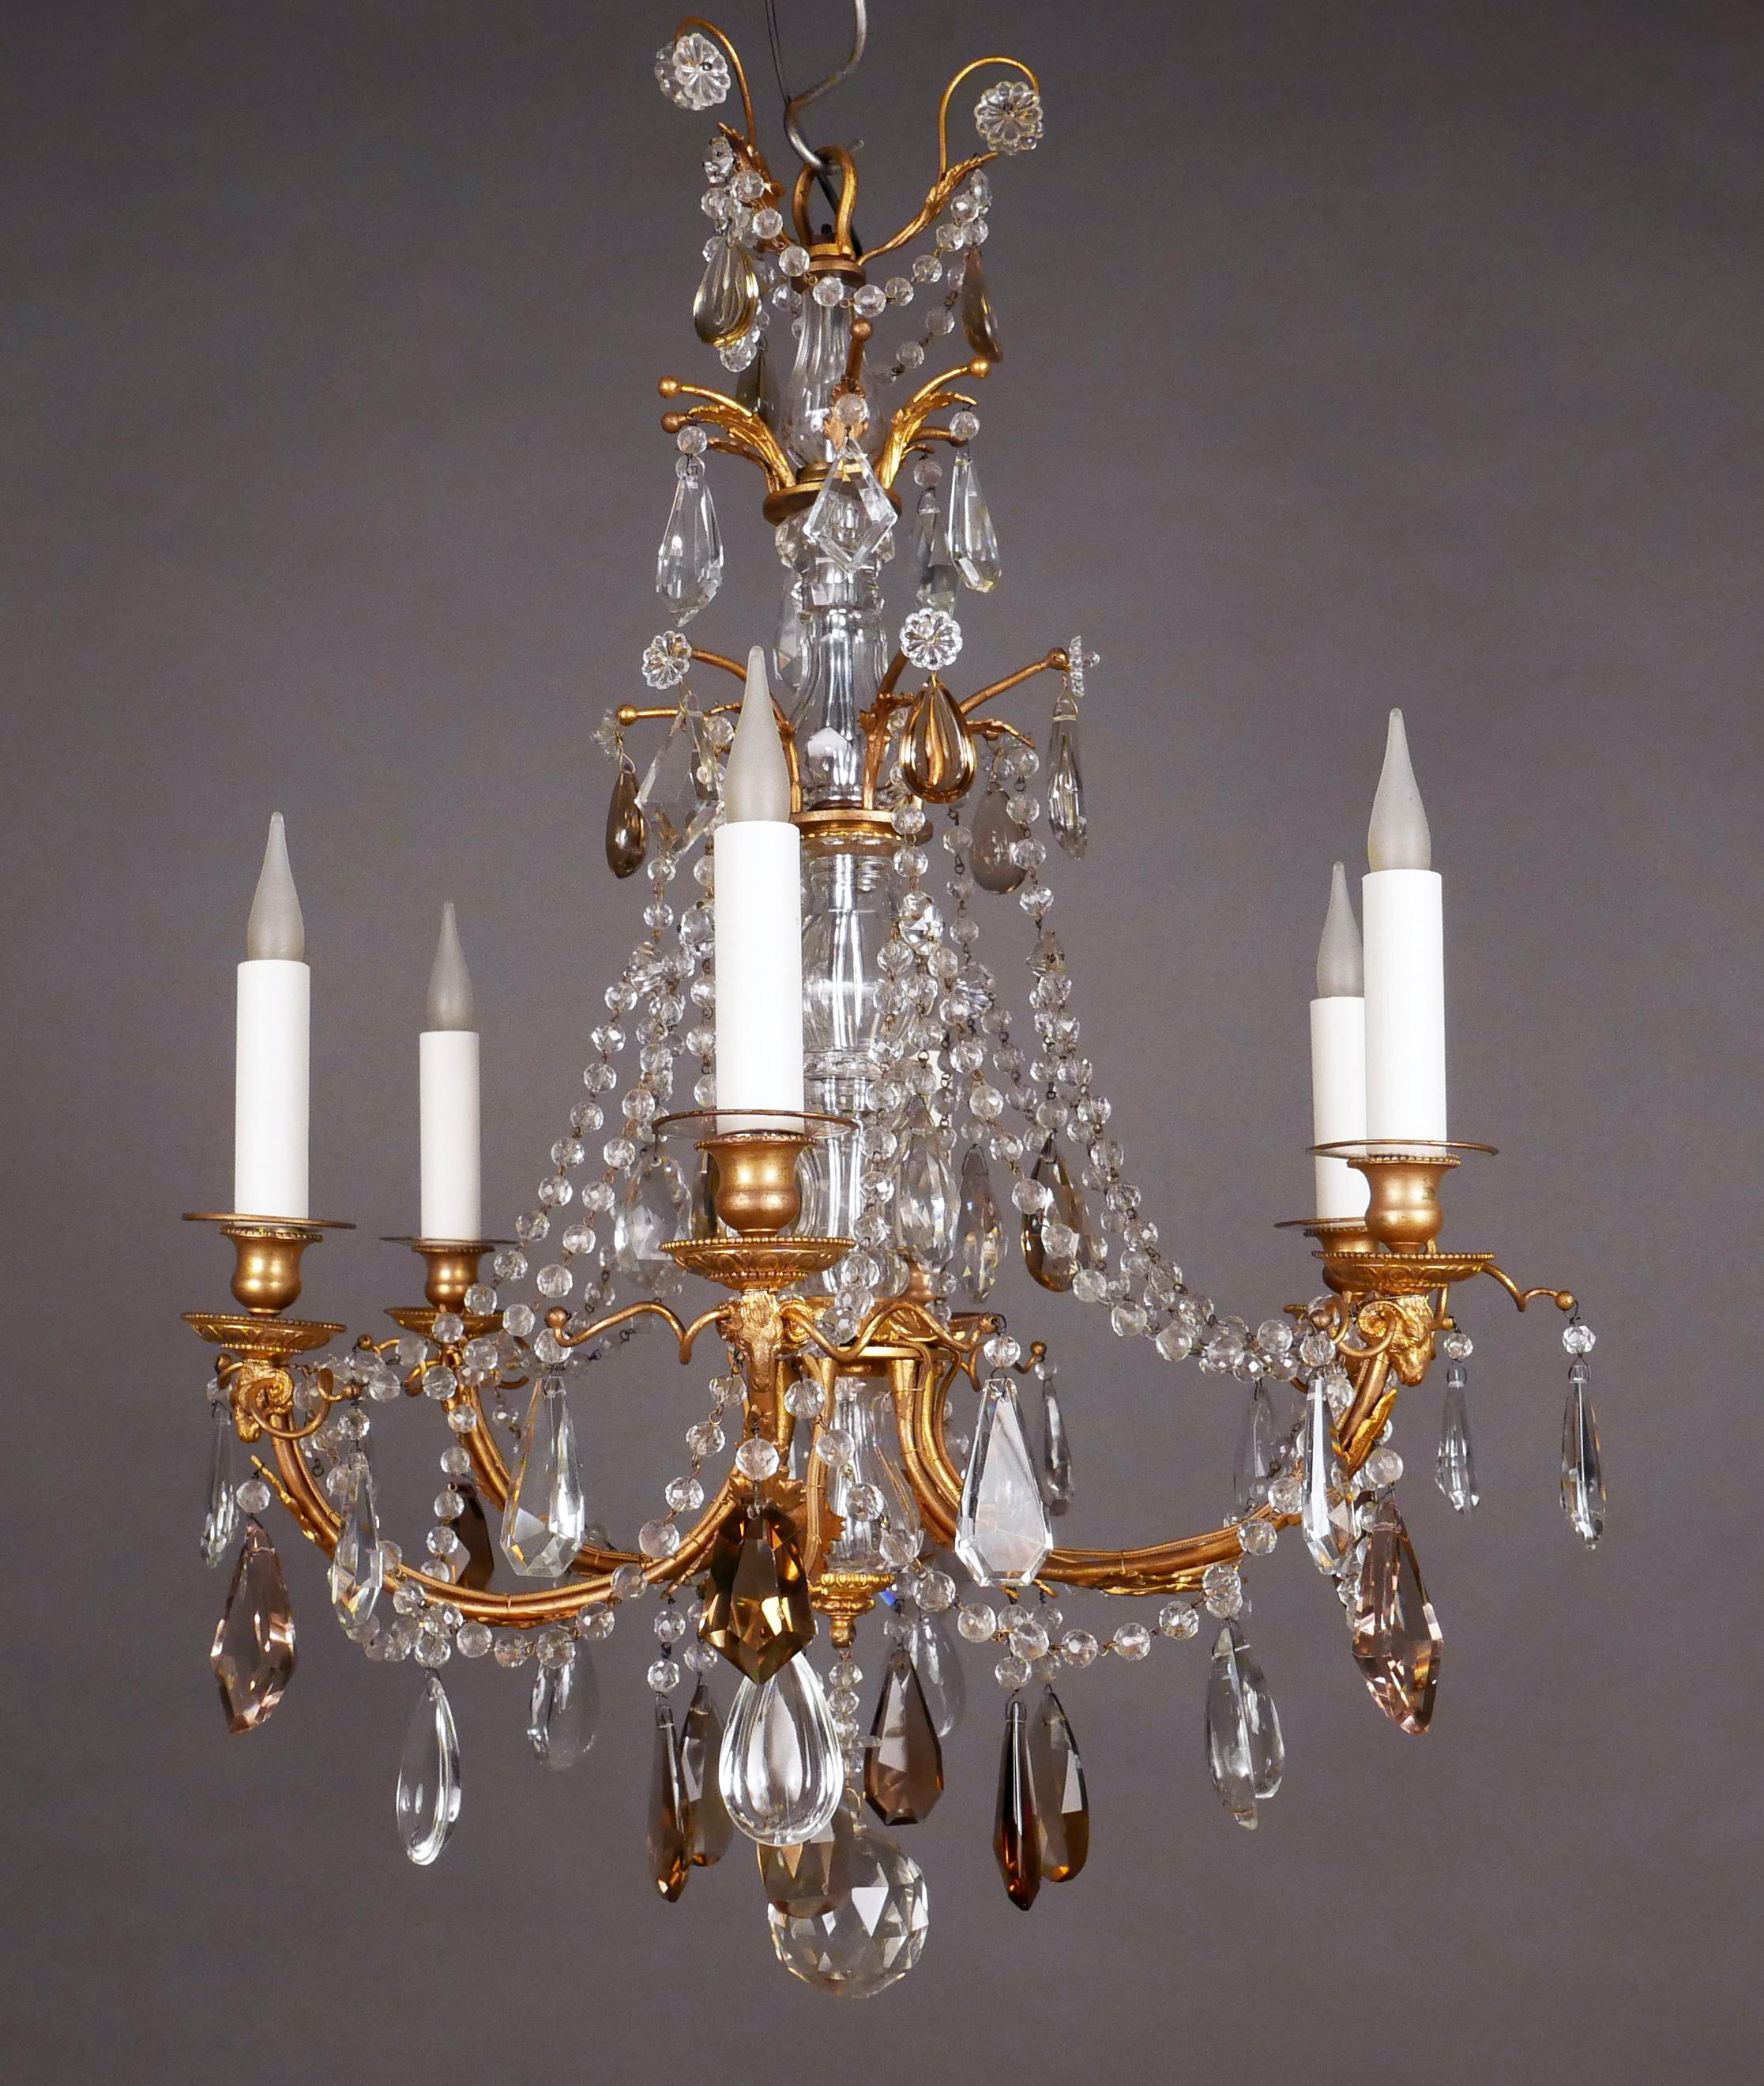 Charming Louis XVI style chandelier in gilded bronze, clear and amber cut crystal with six lights.
The central shaft, formed by a succession of balusters in cut and faceted crystal, is connected to the light-arms by garlands of pearls. The beaded